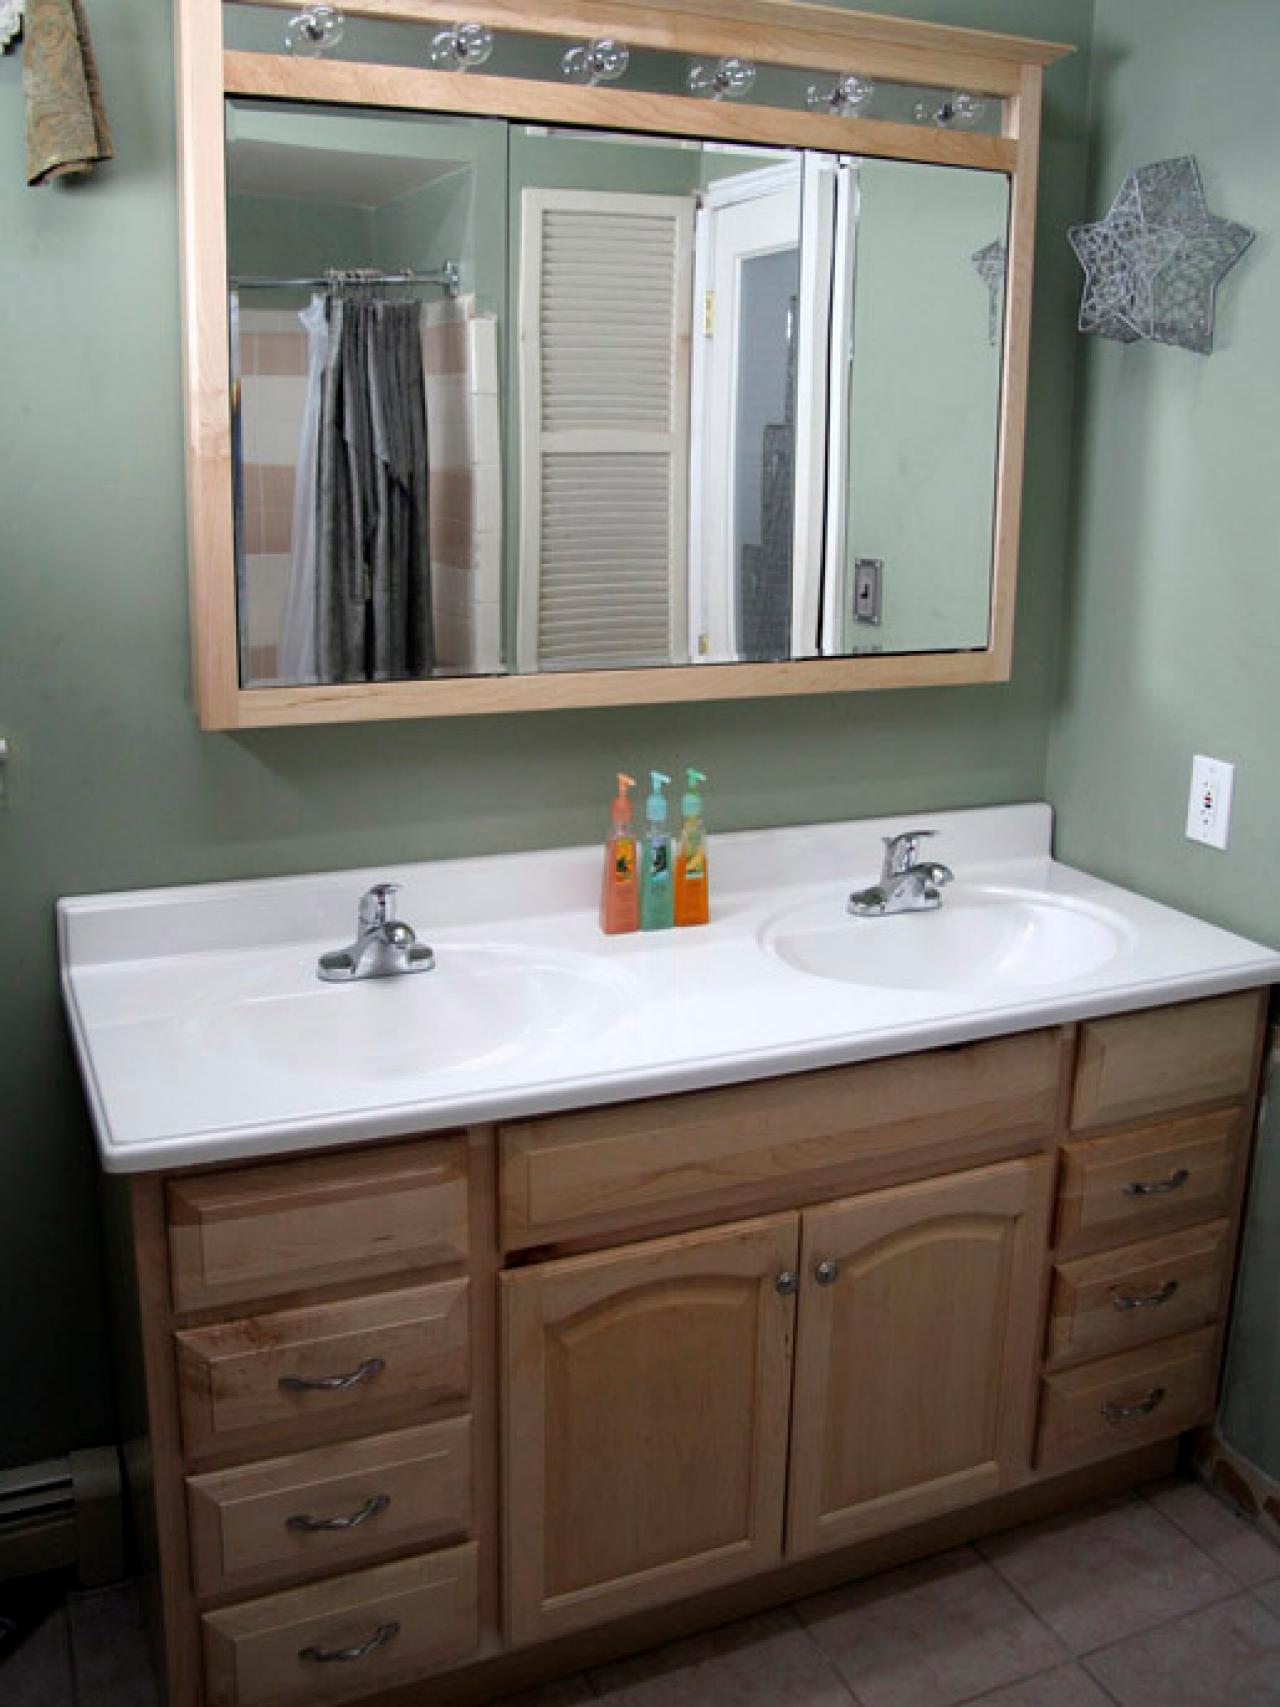 Installing A Bathroom Vanity, How To Install A Bathroom Vanity Top And Sink